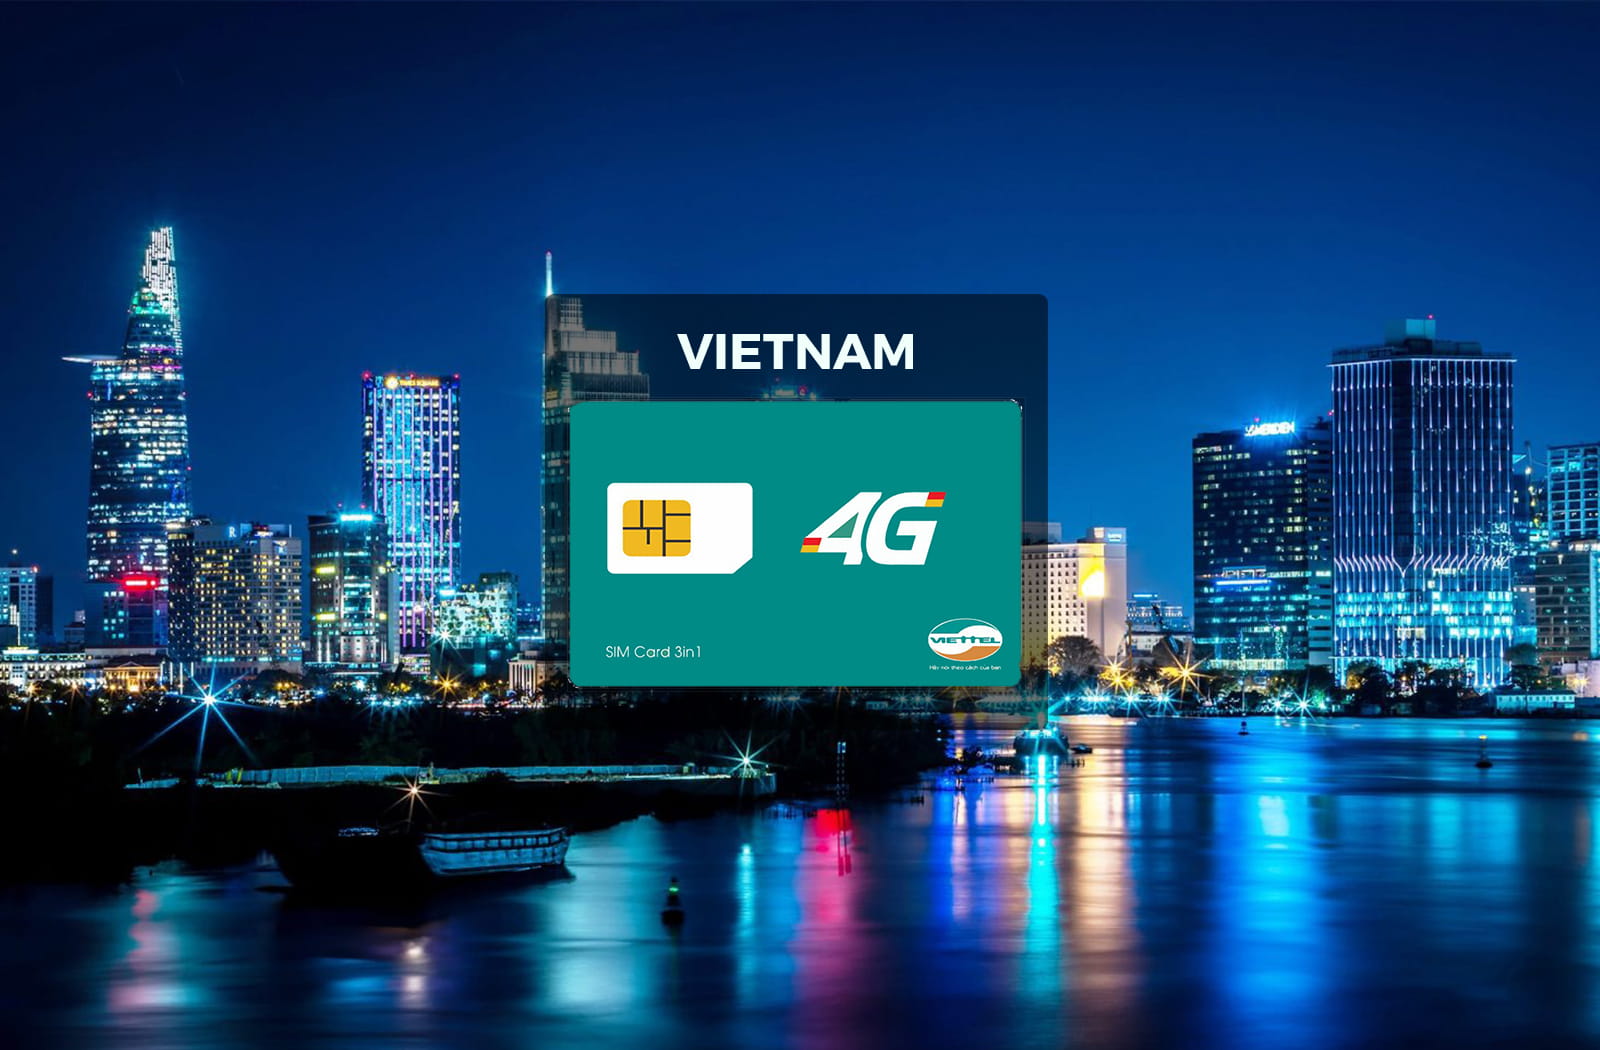 Highlight Vietnam 4G SIM Card Viettel - 3GB Data/day within 7 days (HCMC -Tan Son Nhat Airport Pickup or Hotel Delivery)